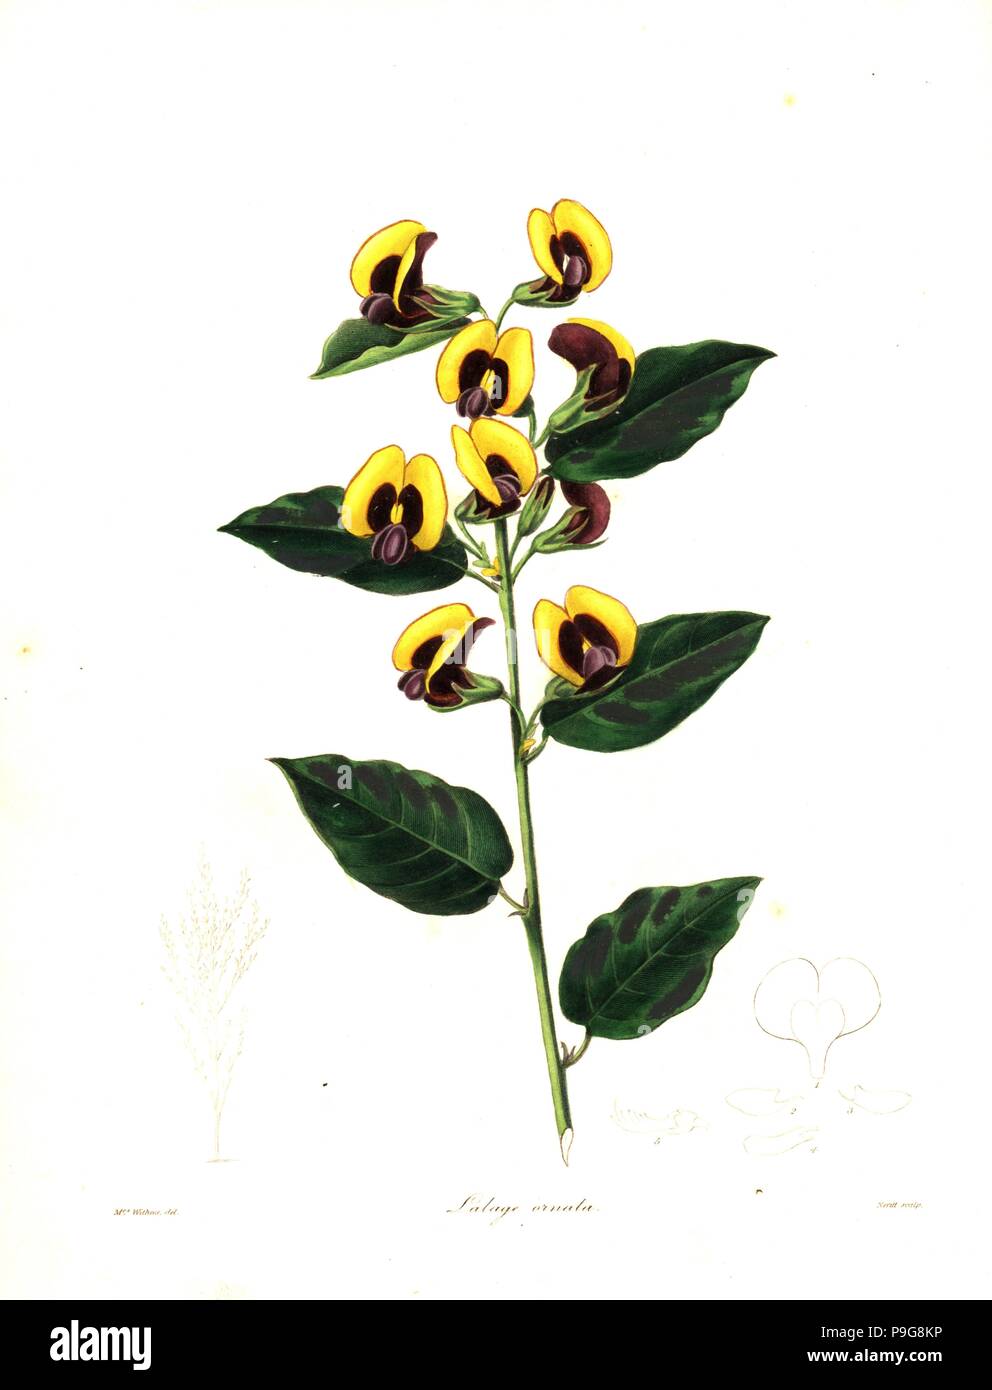 Bossiaea ornata (Crimson lalage, Lalage ornata). Handcoloured copperplate engraving by S. Nevitt after a botanical illustration by Mrs Augusta Withers from Benjamin Maund and the Rev. John Stevens Henslow's The Botanist, London, 1836. Stock Photo